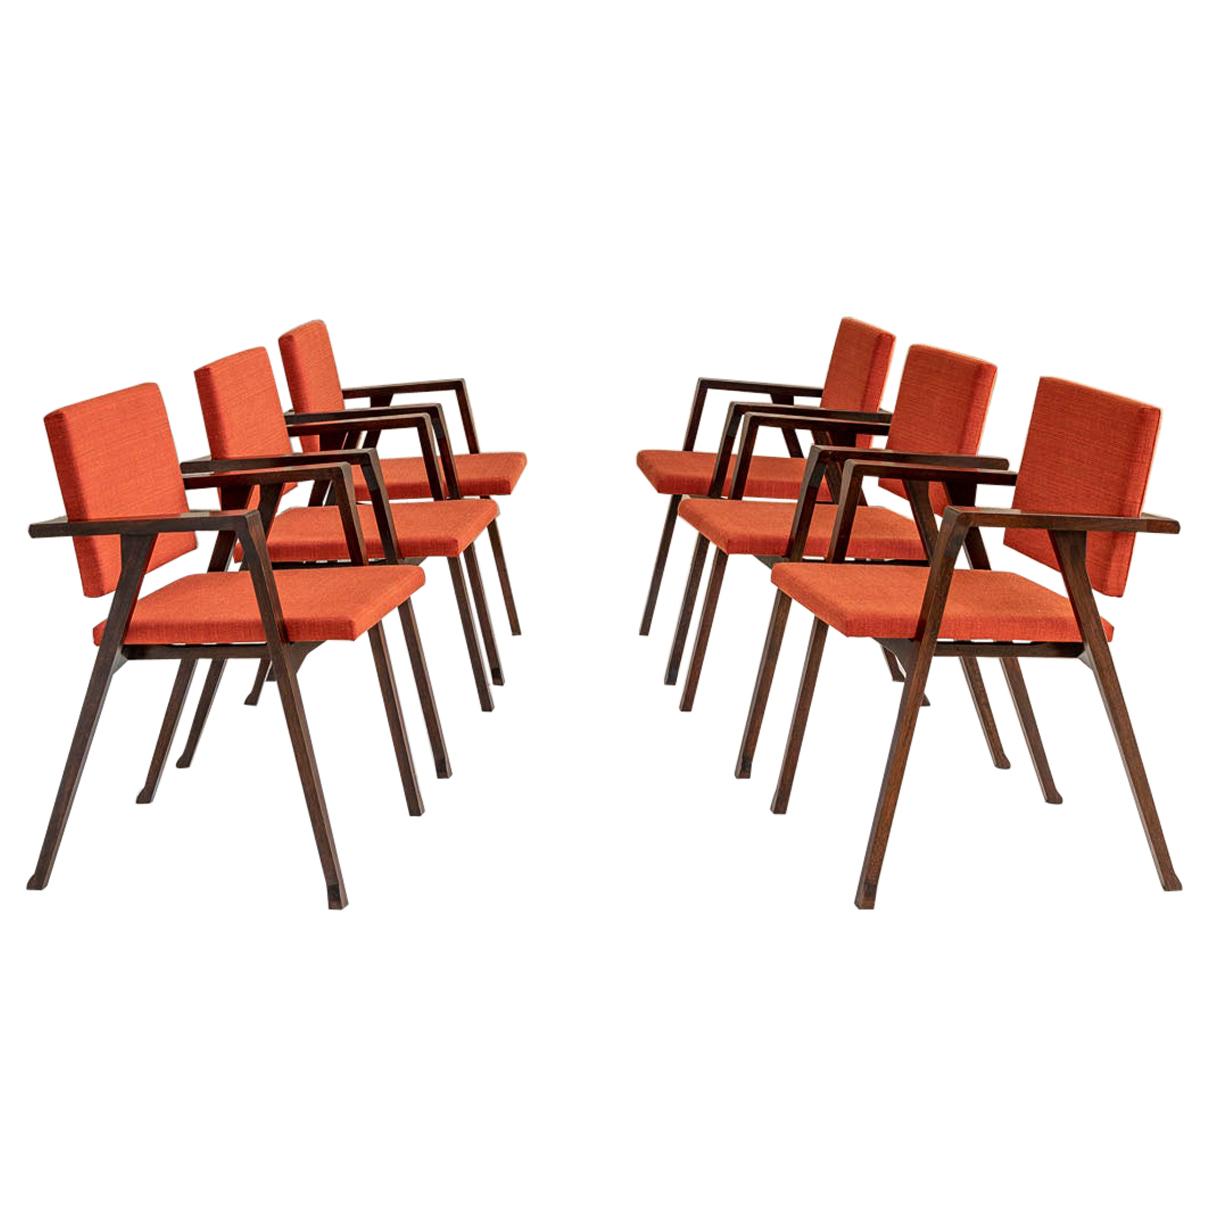 Set of 6 Luisa Chairs by Franco Albini